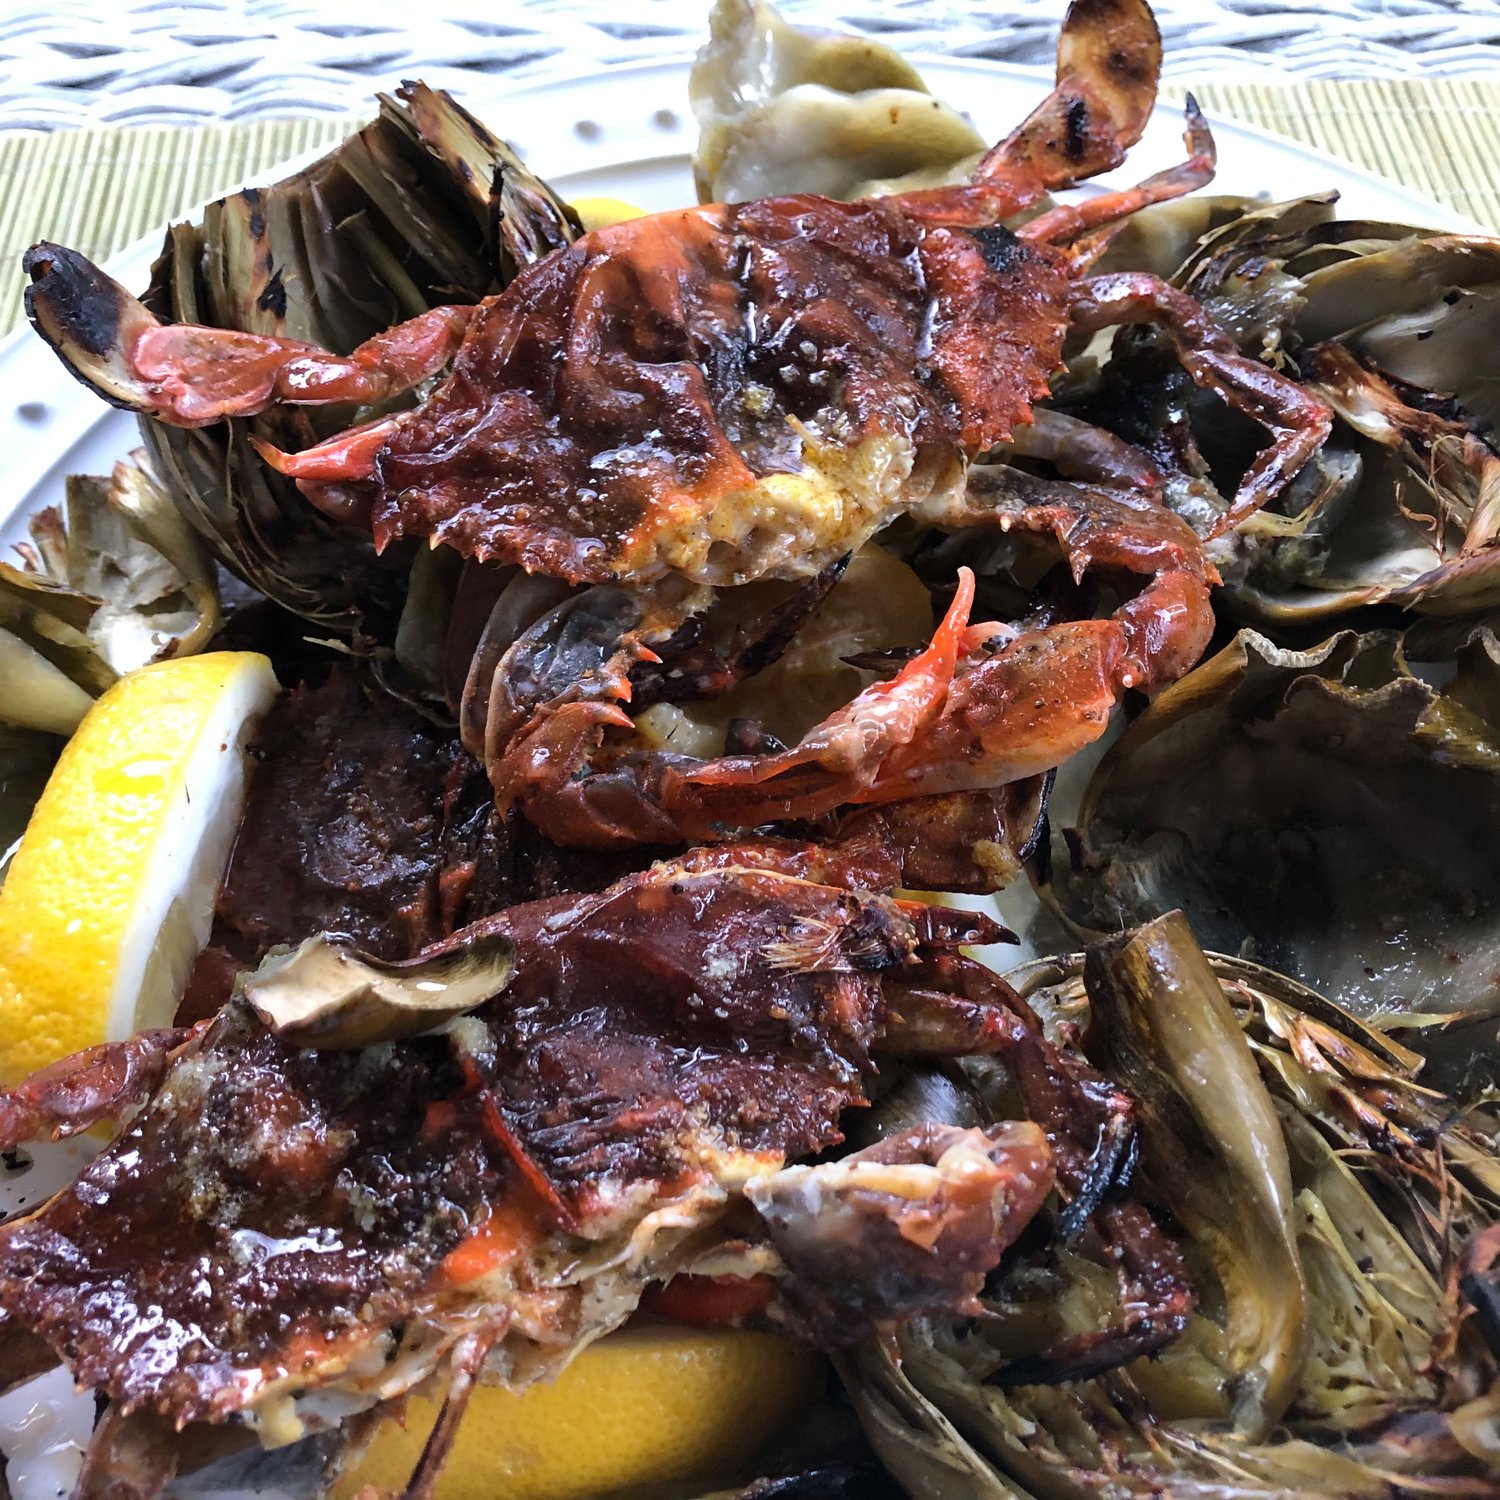 Softshell crabs the centerpiece of a Father's Day feast Inquirer and